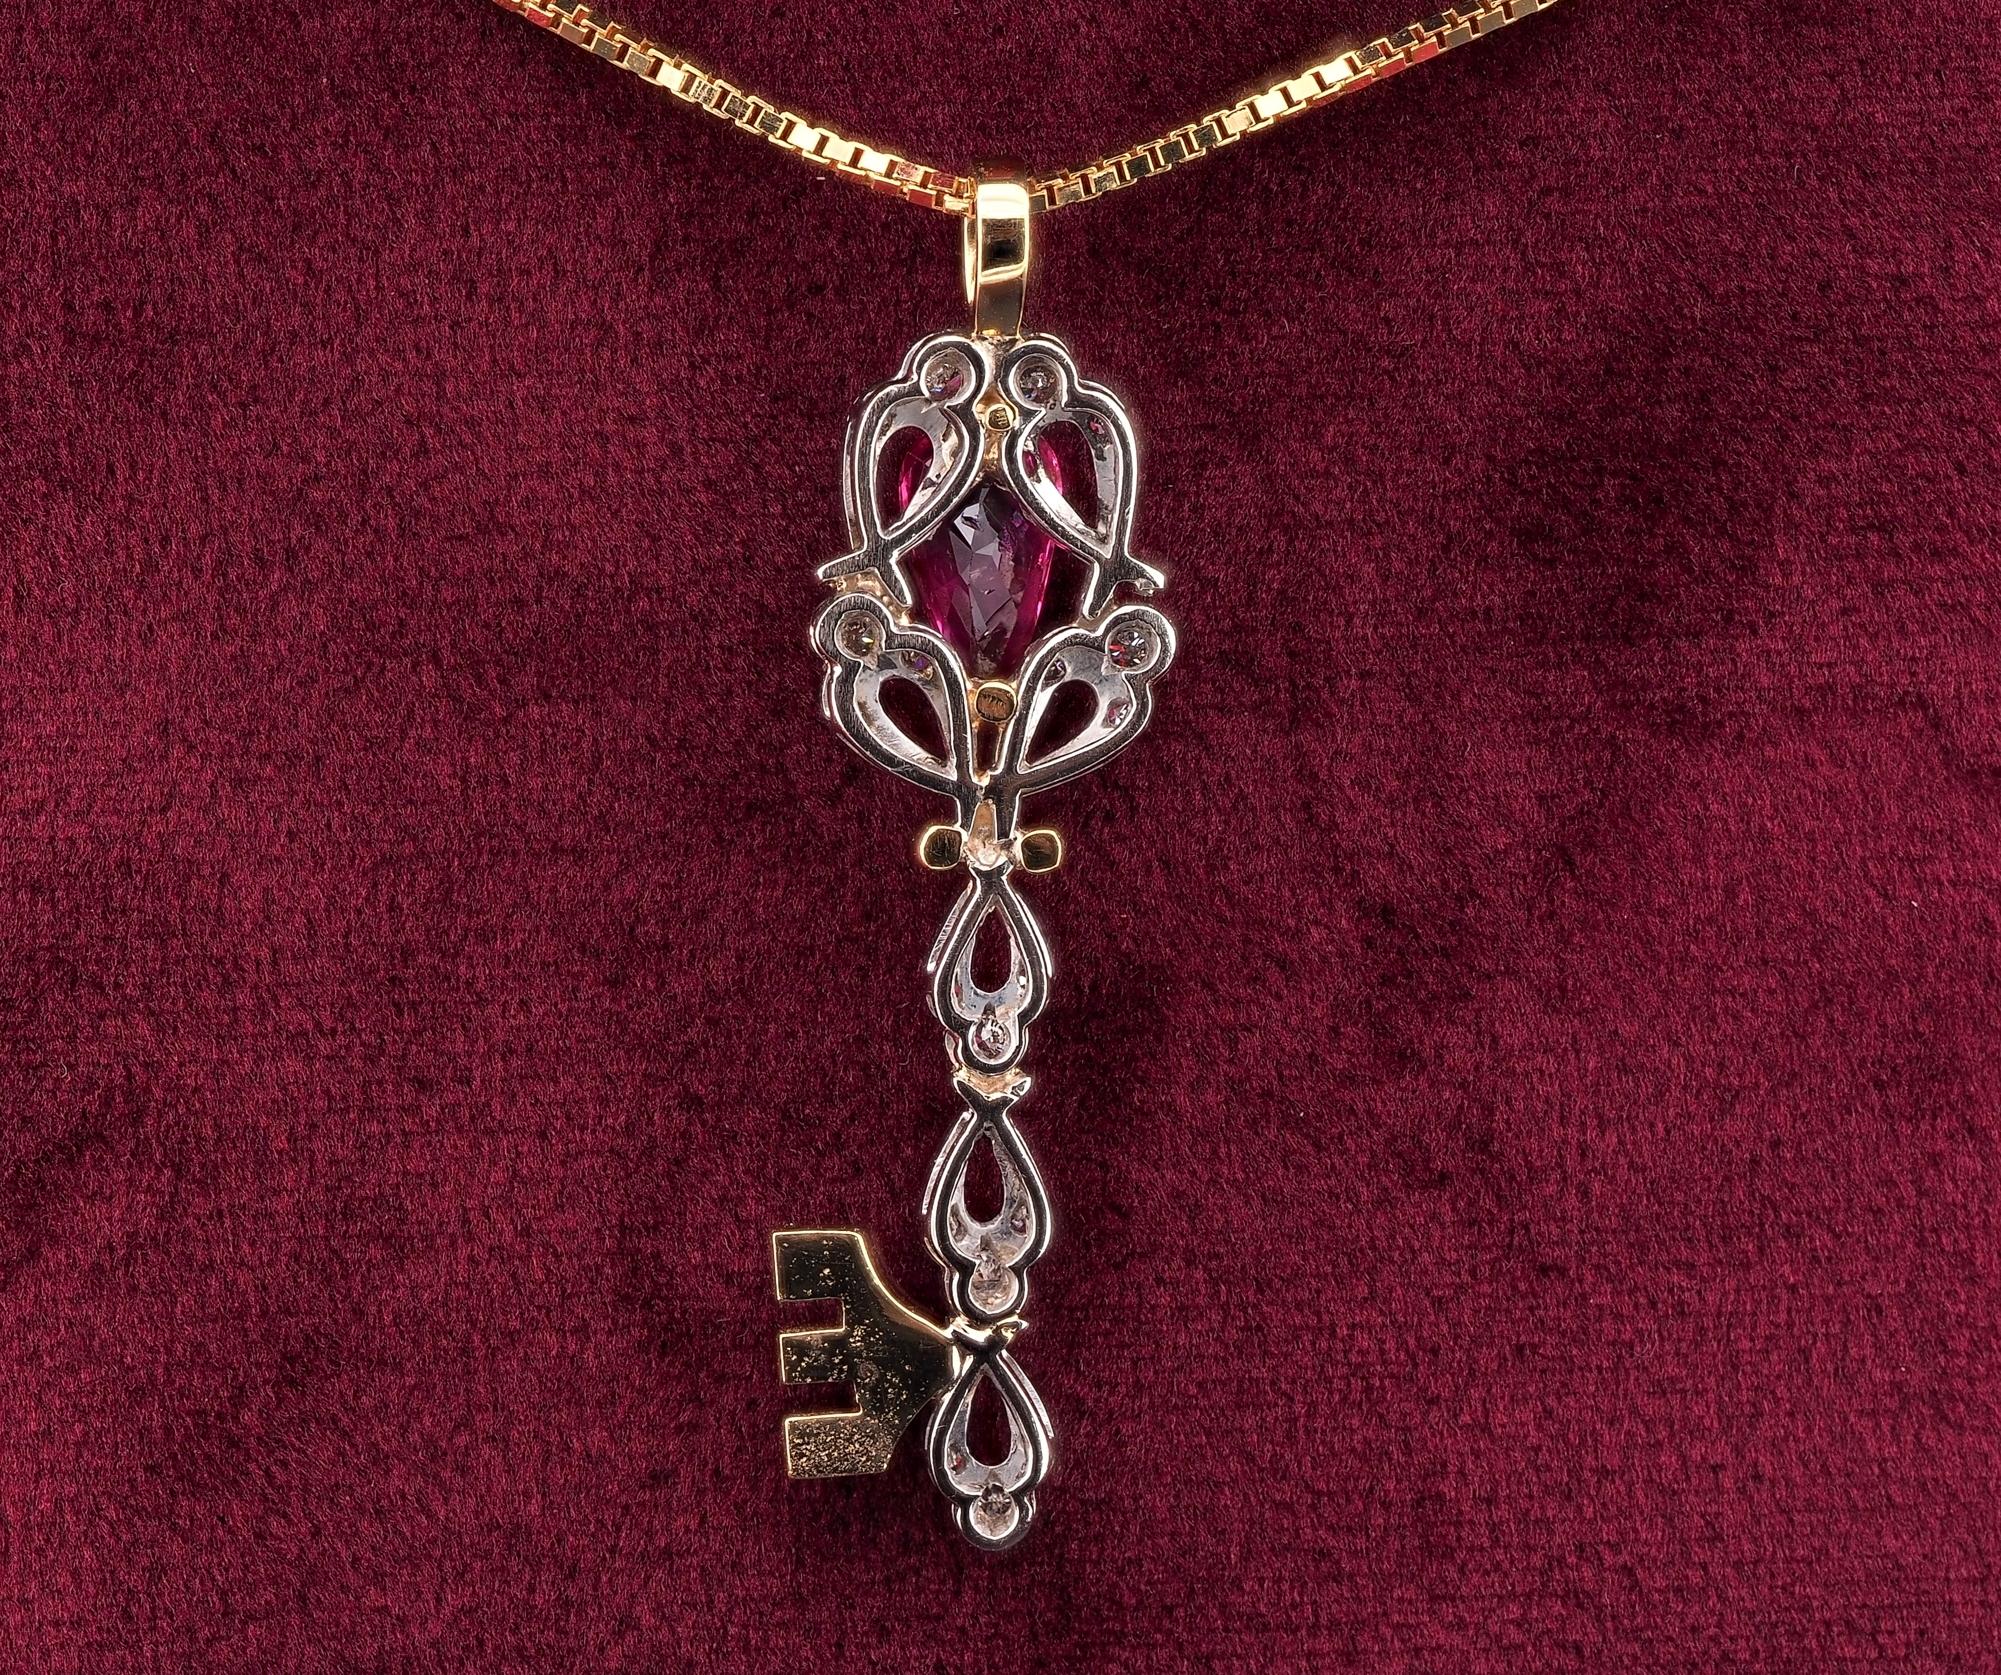 Estate 2.20 Ct. Natural Ruby Diamond Key Pendant Necklace 18 KT In Good Condition For Sale In Napoli, IT